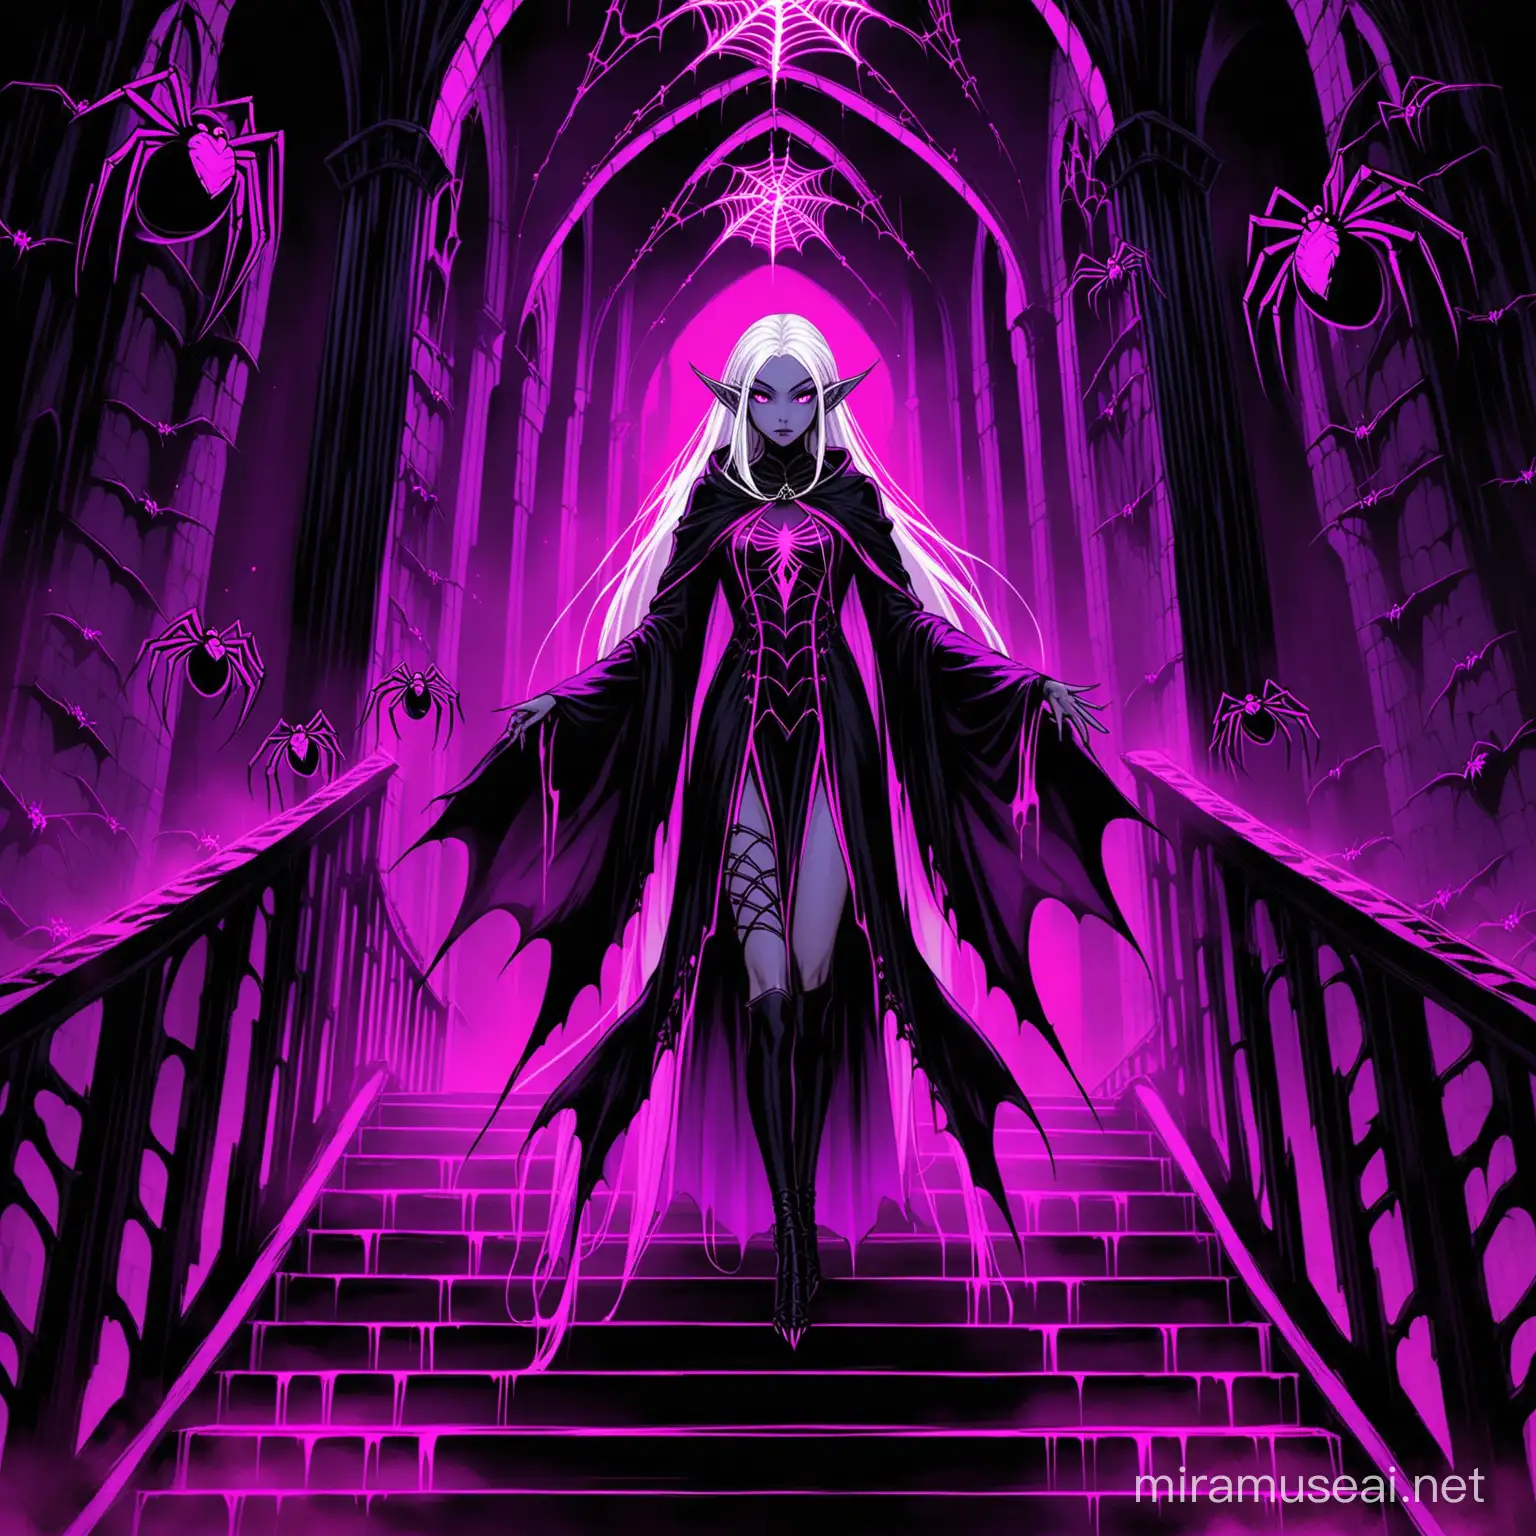 Dark Elf woman, wearing black and purple robes with depictions of spiders on them, her eyes are neon pink, and her hair is short and white, she is descending a dark staircase in a high gothic castle.